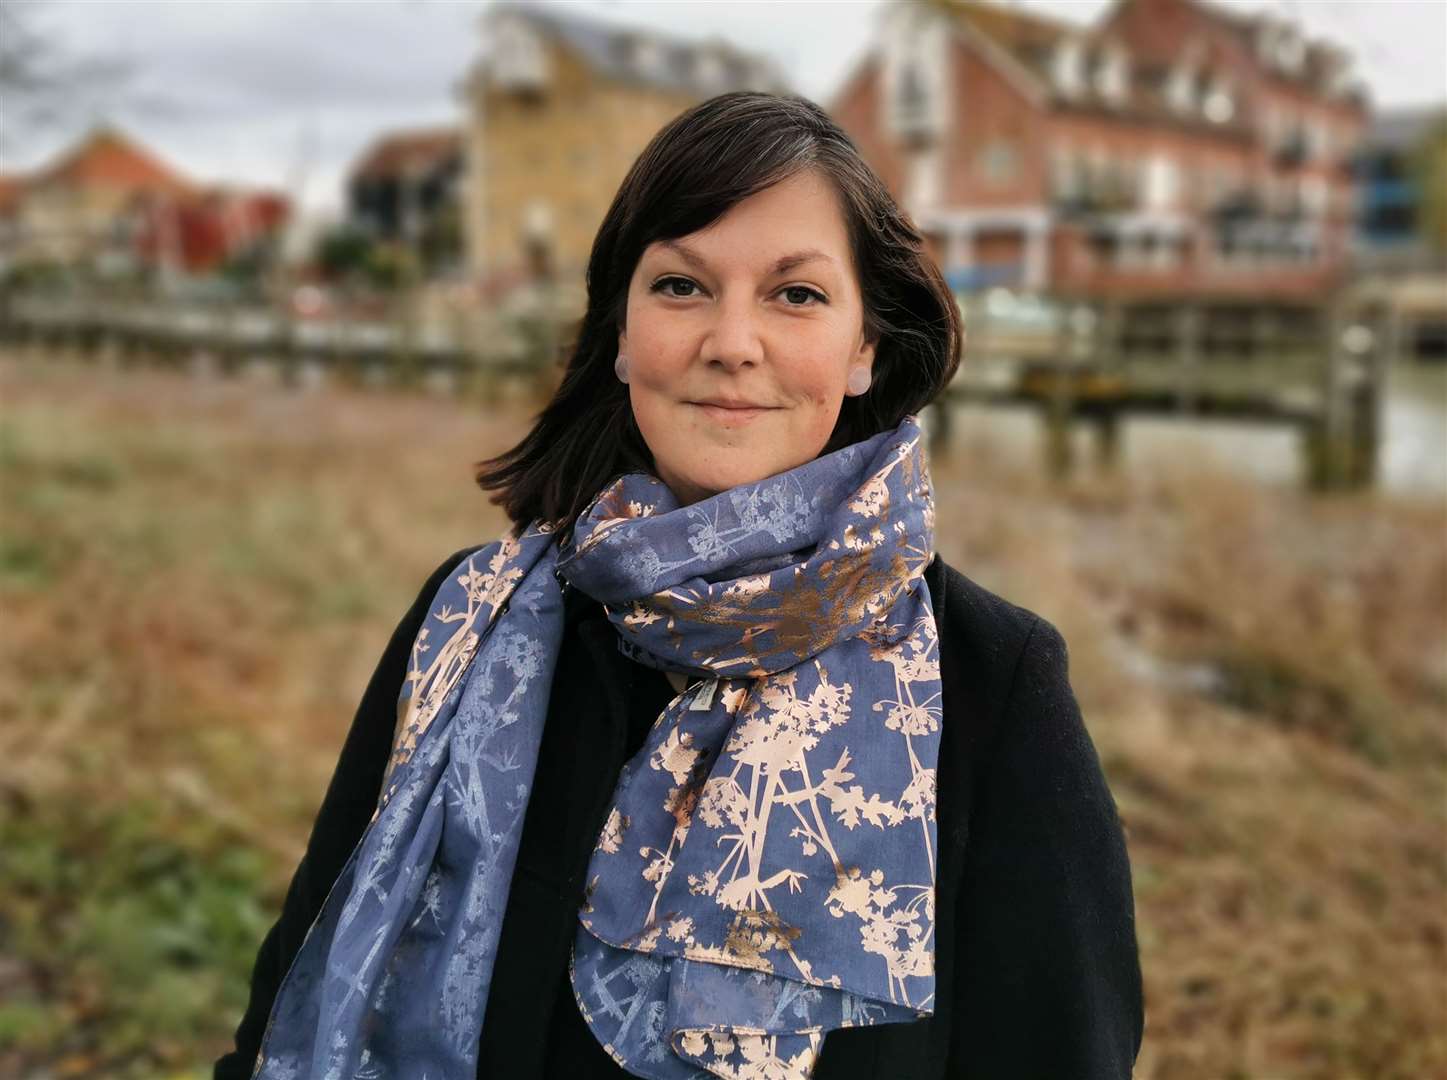 Hannah Perkin, the Liberal Democrat candidate for Faversham and Mid Kent